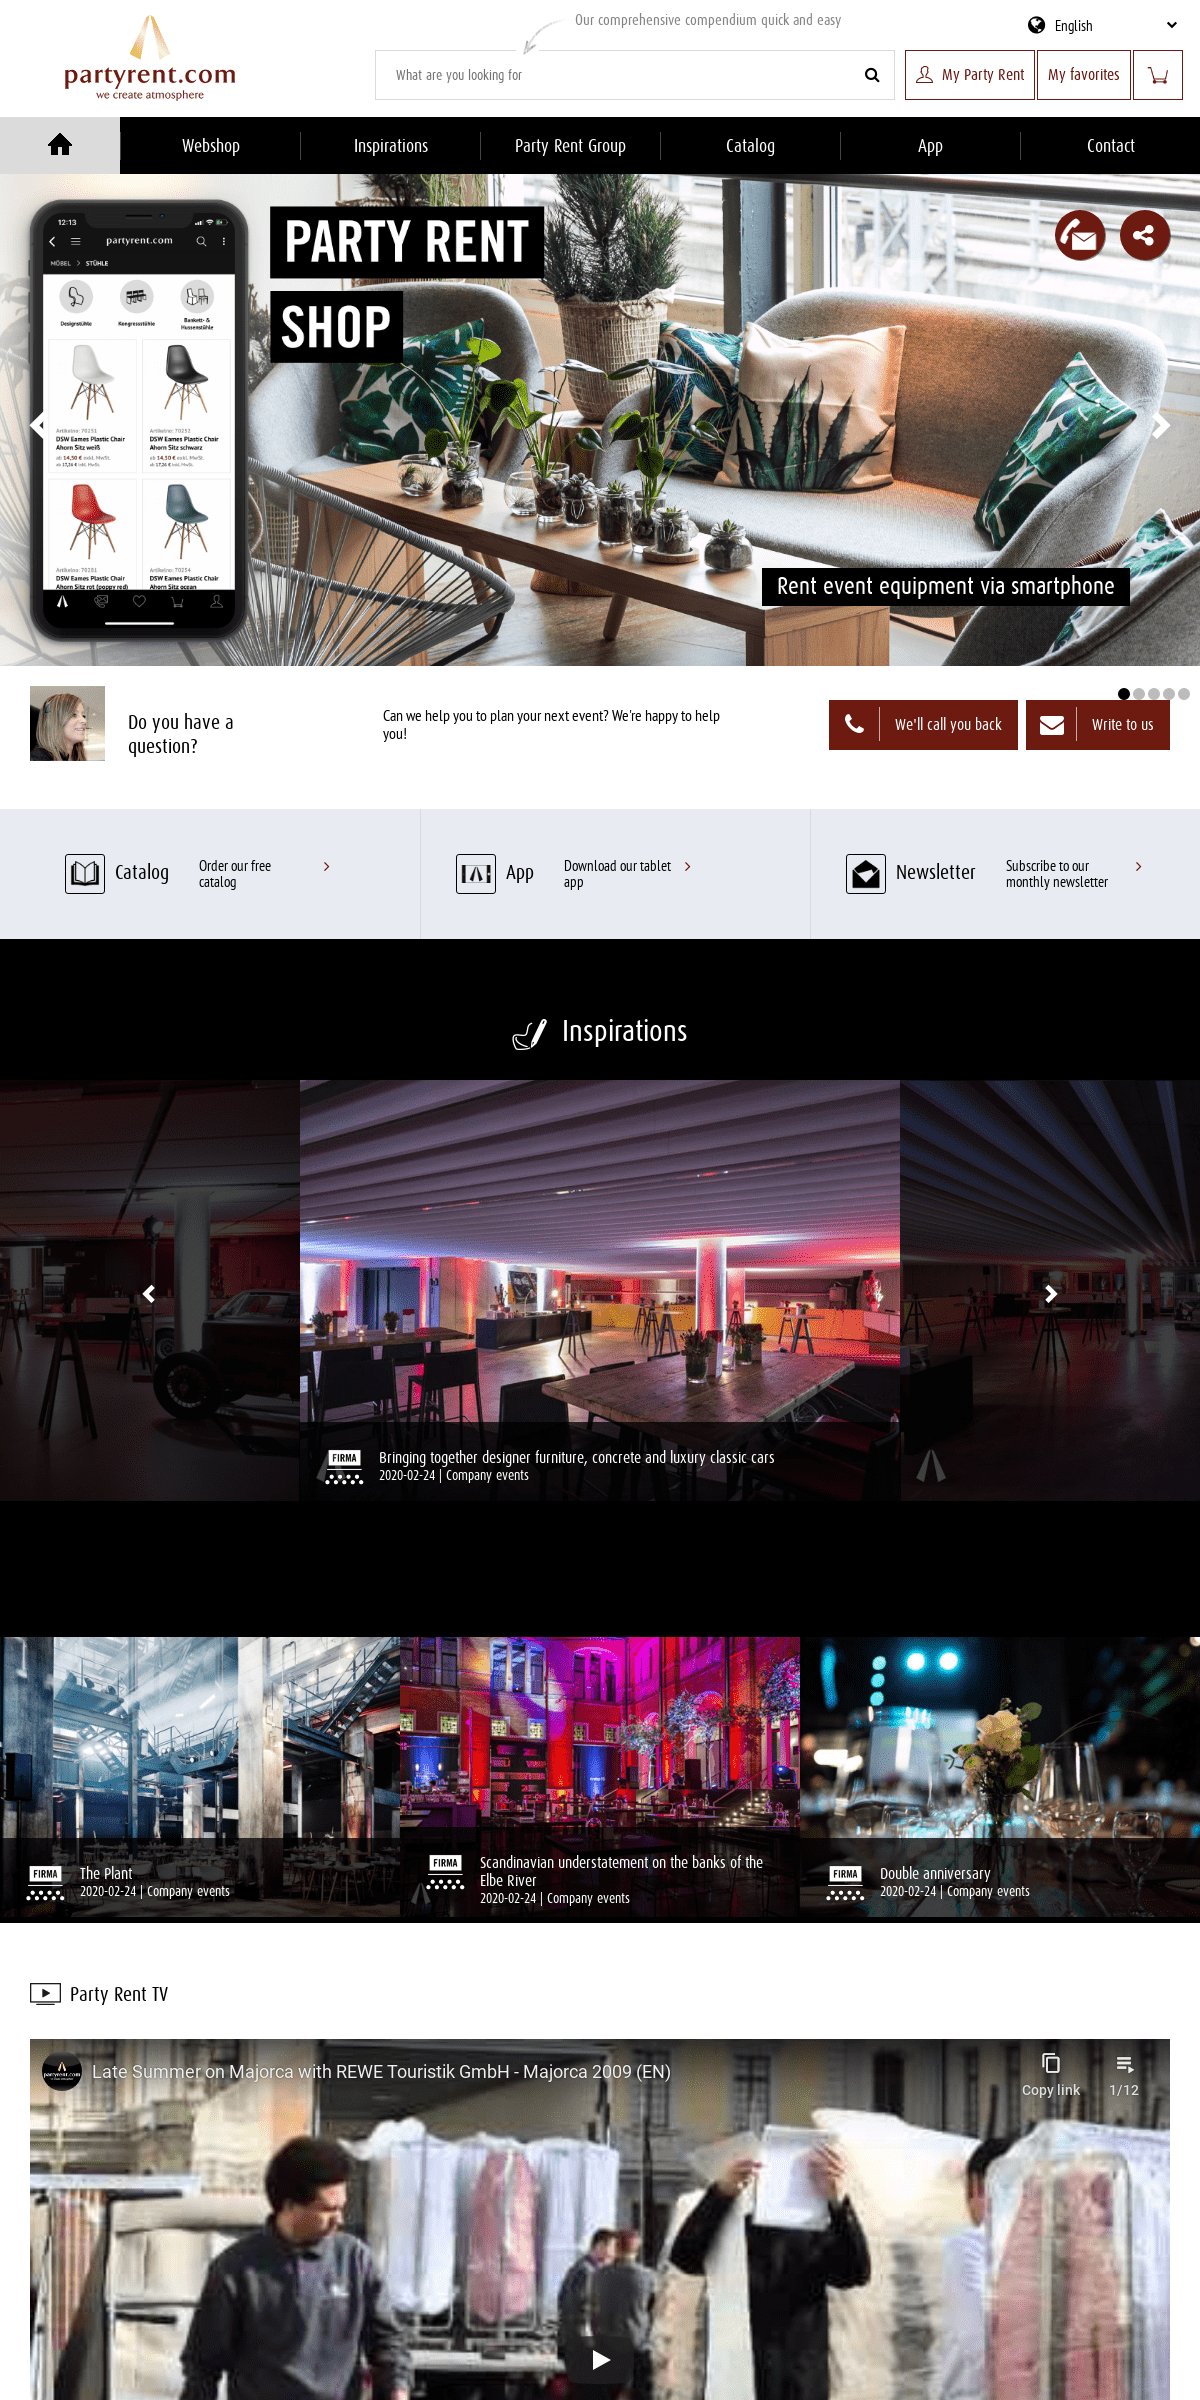 A complete backup of partyrent.com